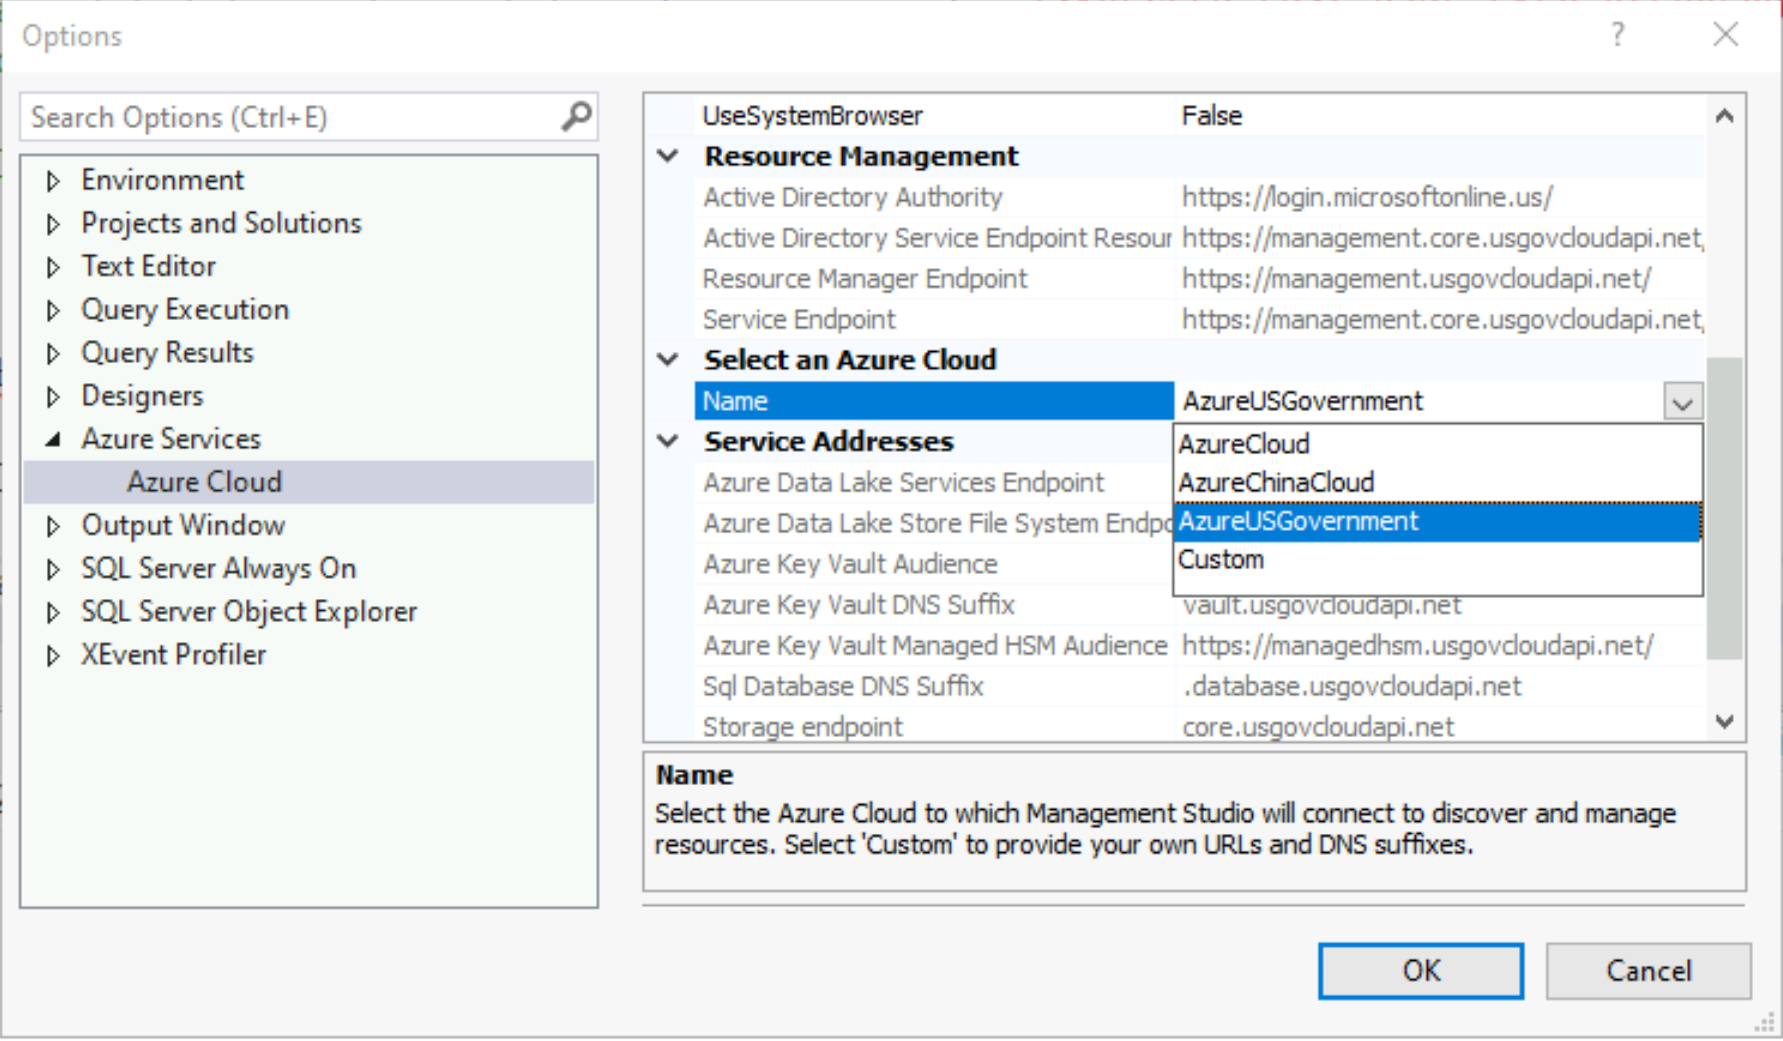 Screenshot of SSMS UI, options page, Azure services, with Azure cloud highlighted. 